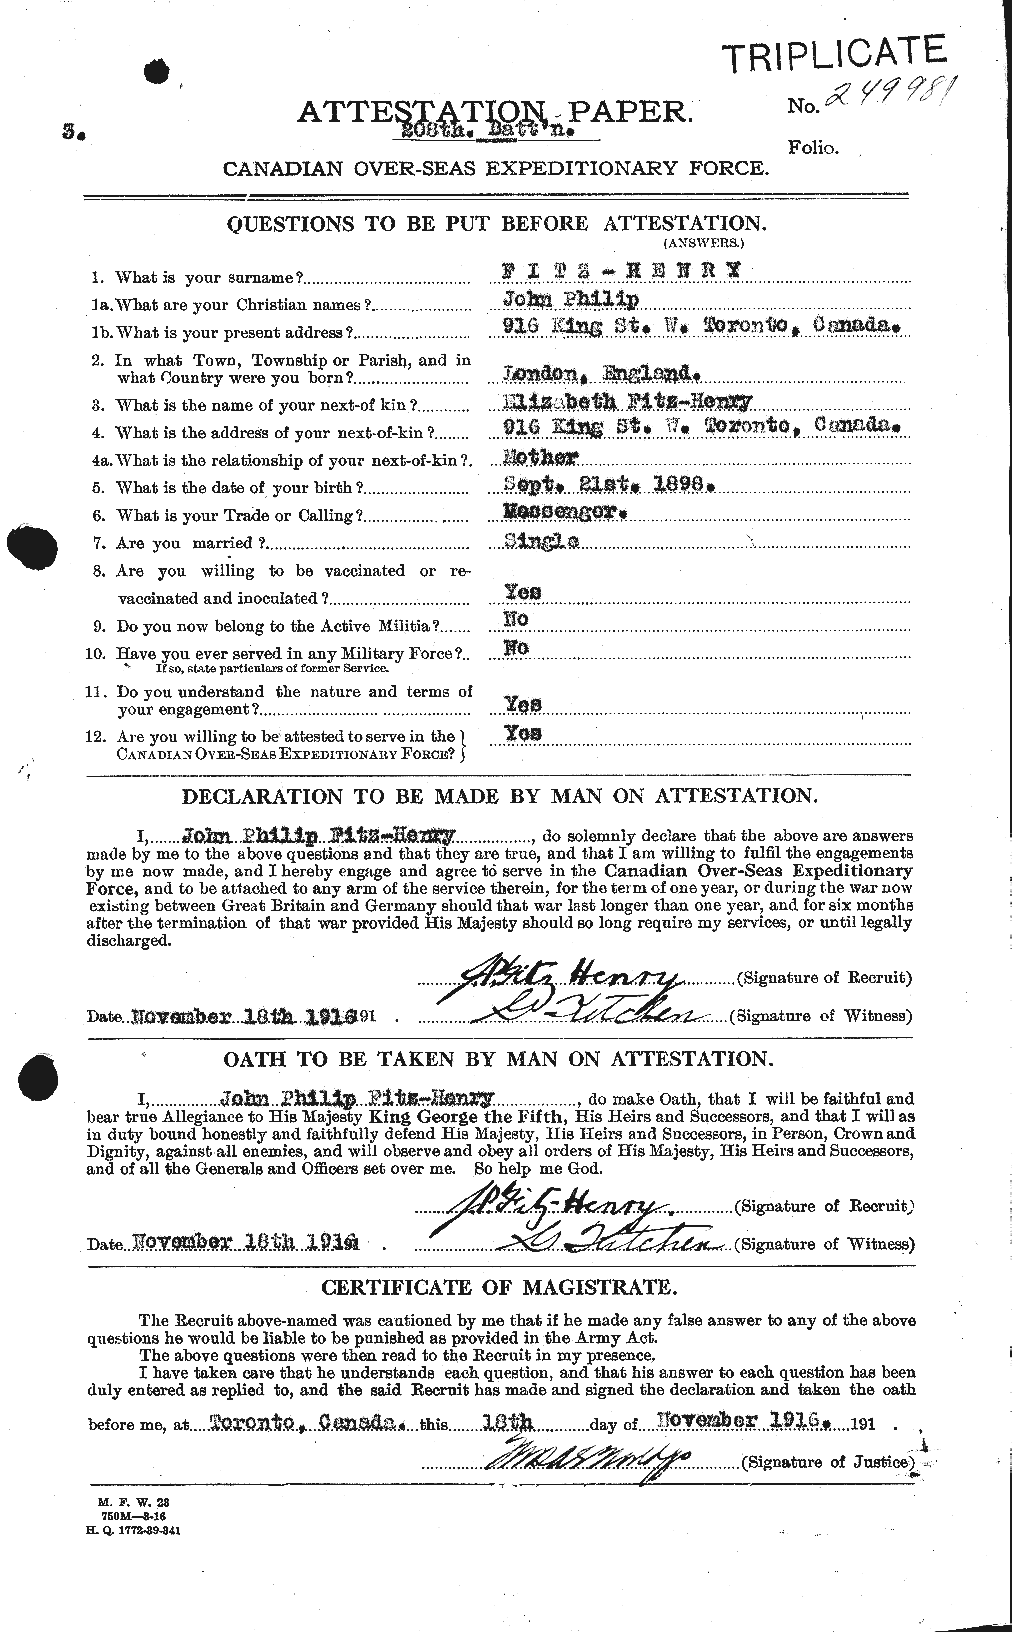 Personnel Records of the First World War - CEF 326723a